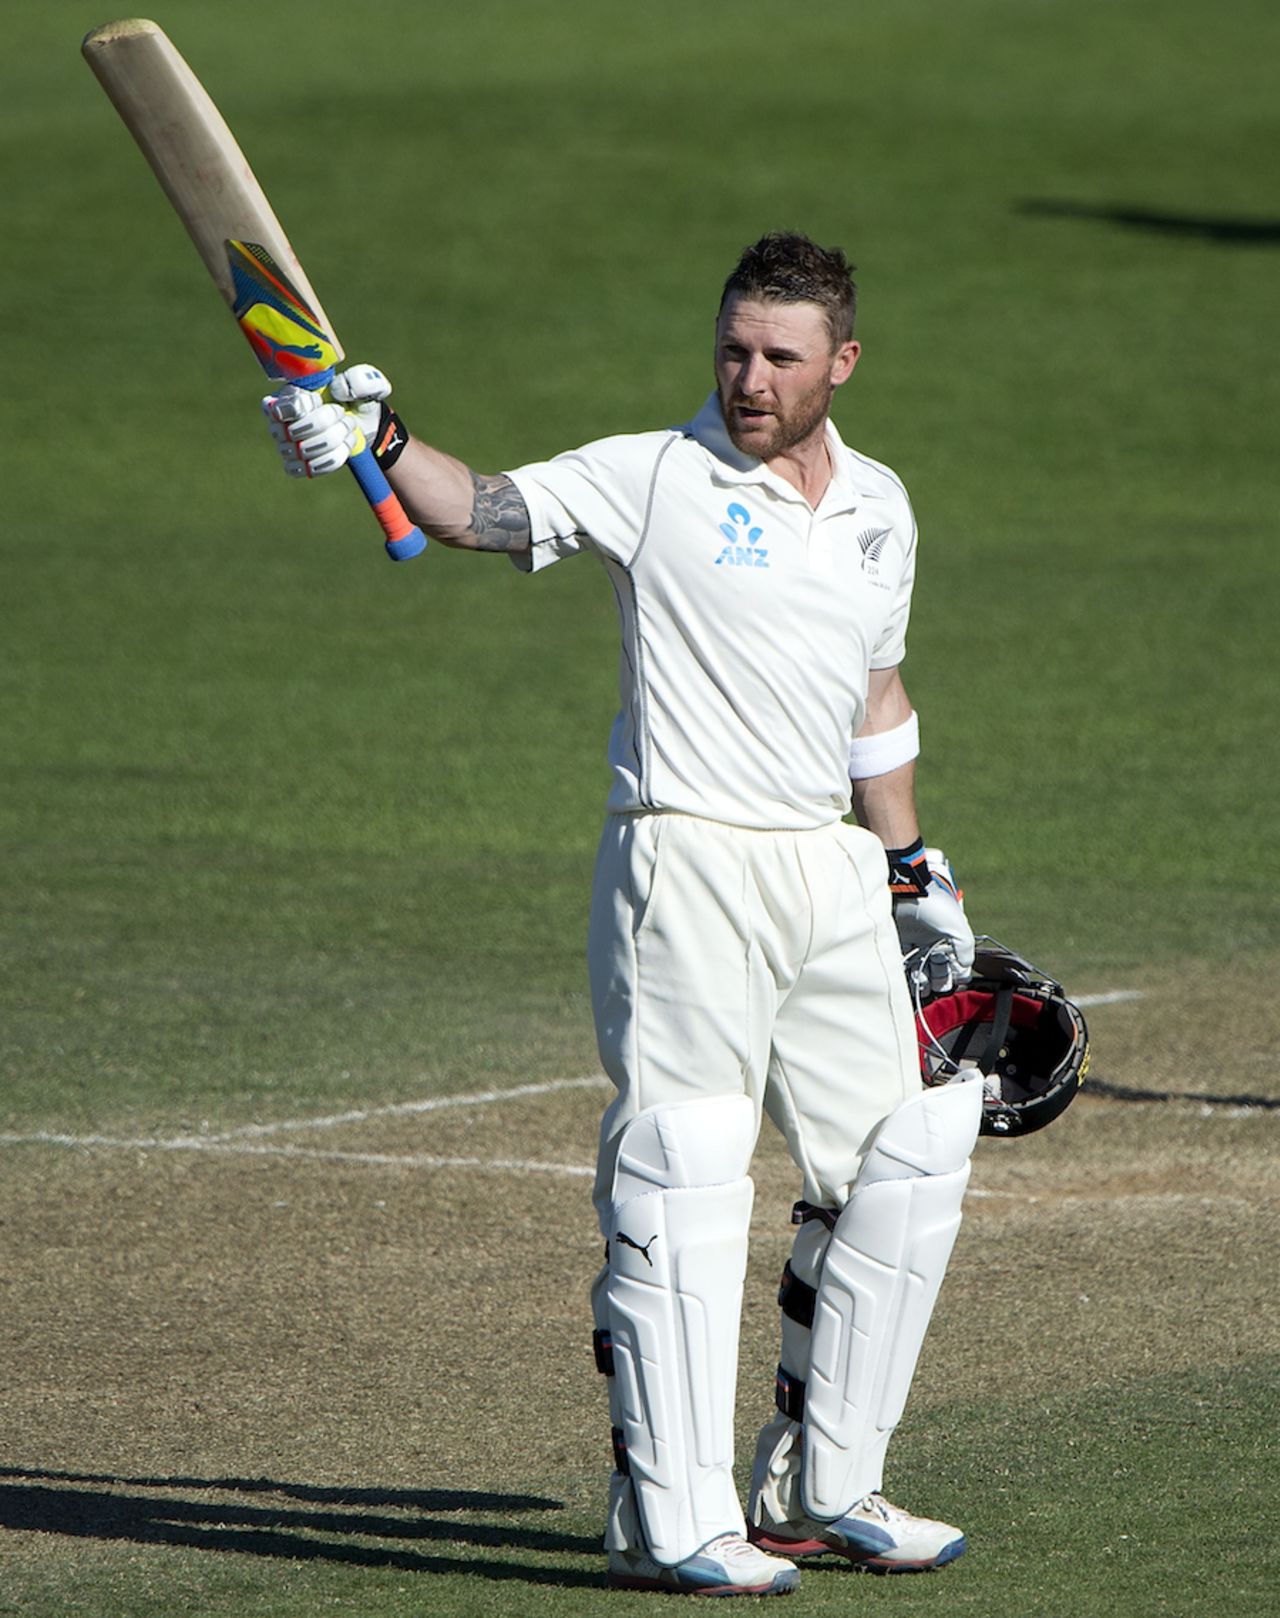 Brendon McCullum raises the bat after his fighting ton, New Zealand v India, 2nd Test, 3rd day, Wellington, February 16, 2014